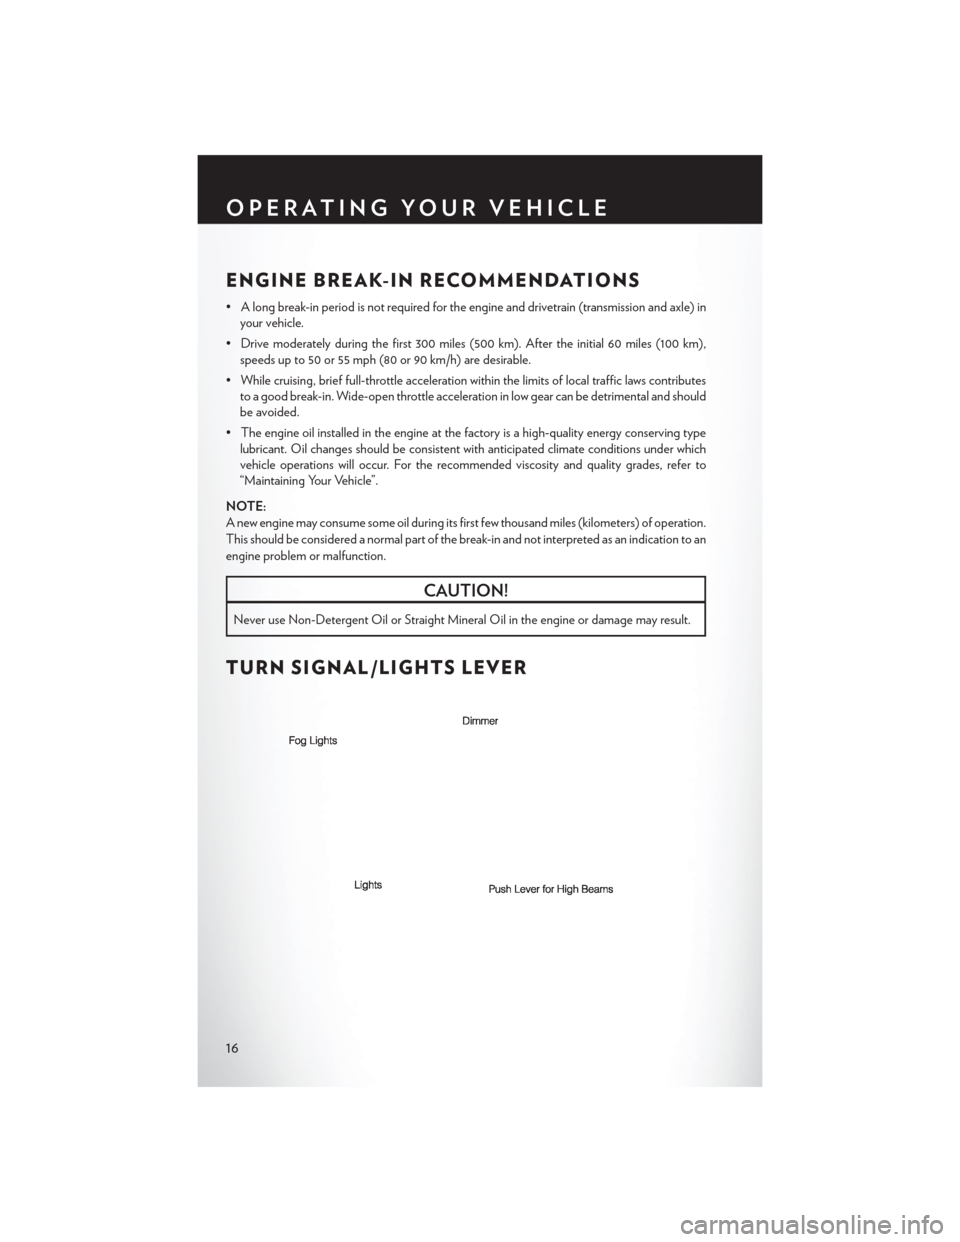 CHRYSLER 200 2013 1.G User Guide ENGINE BREAK-IN RECOMMENDATIONS
• A long break-in period is not required for the engine and drivetrain (transmission and axle) inyour vehicle.
• Drive moderately during the first 300 miles (500 km